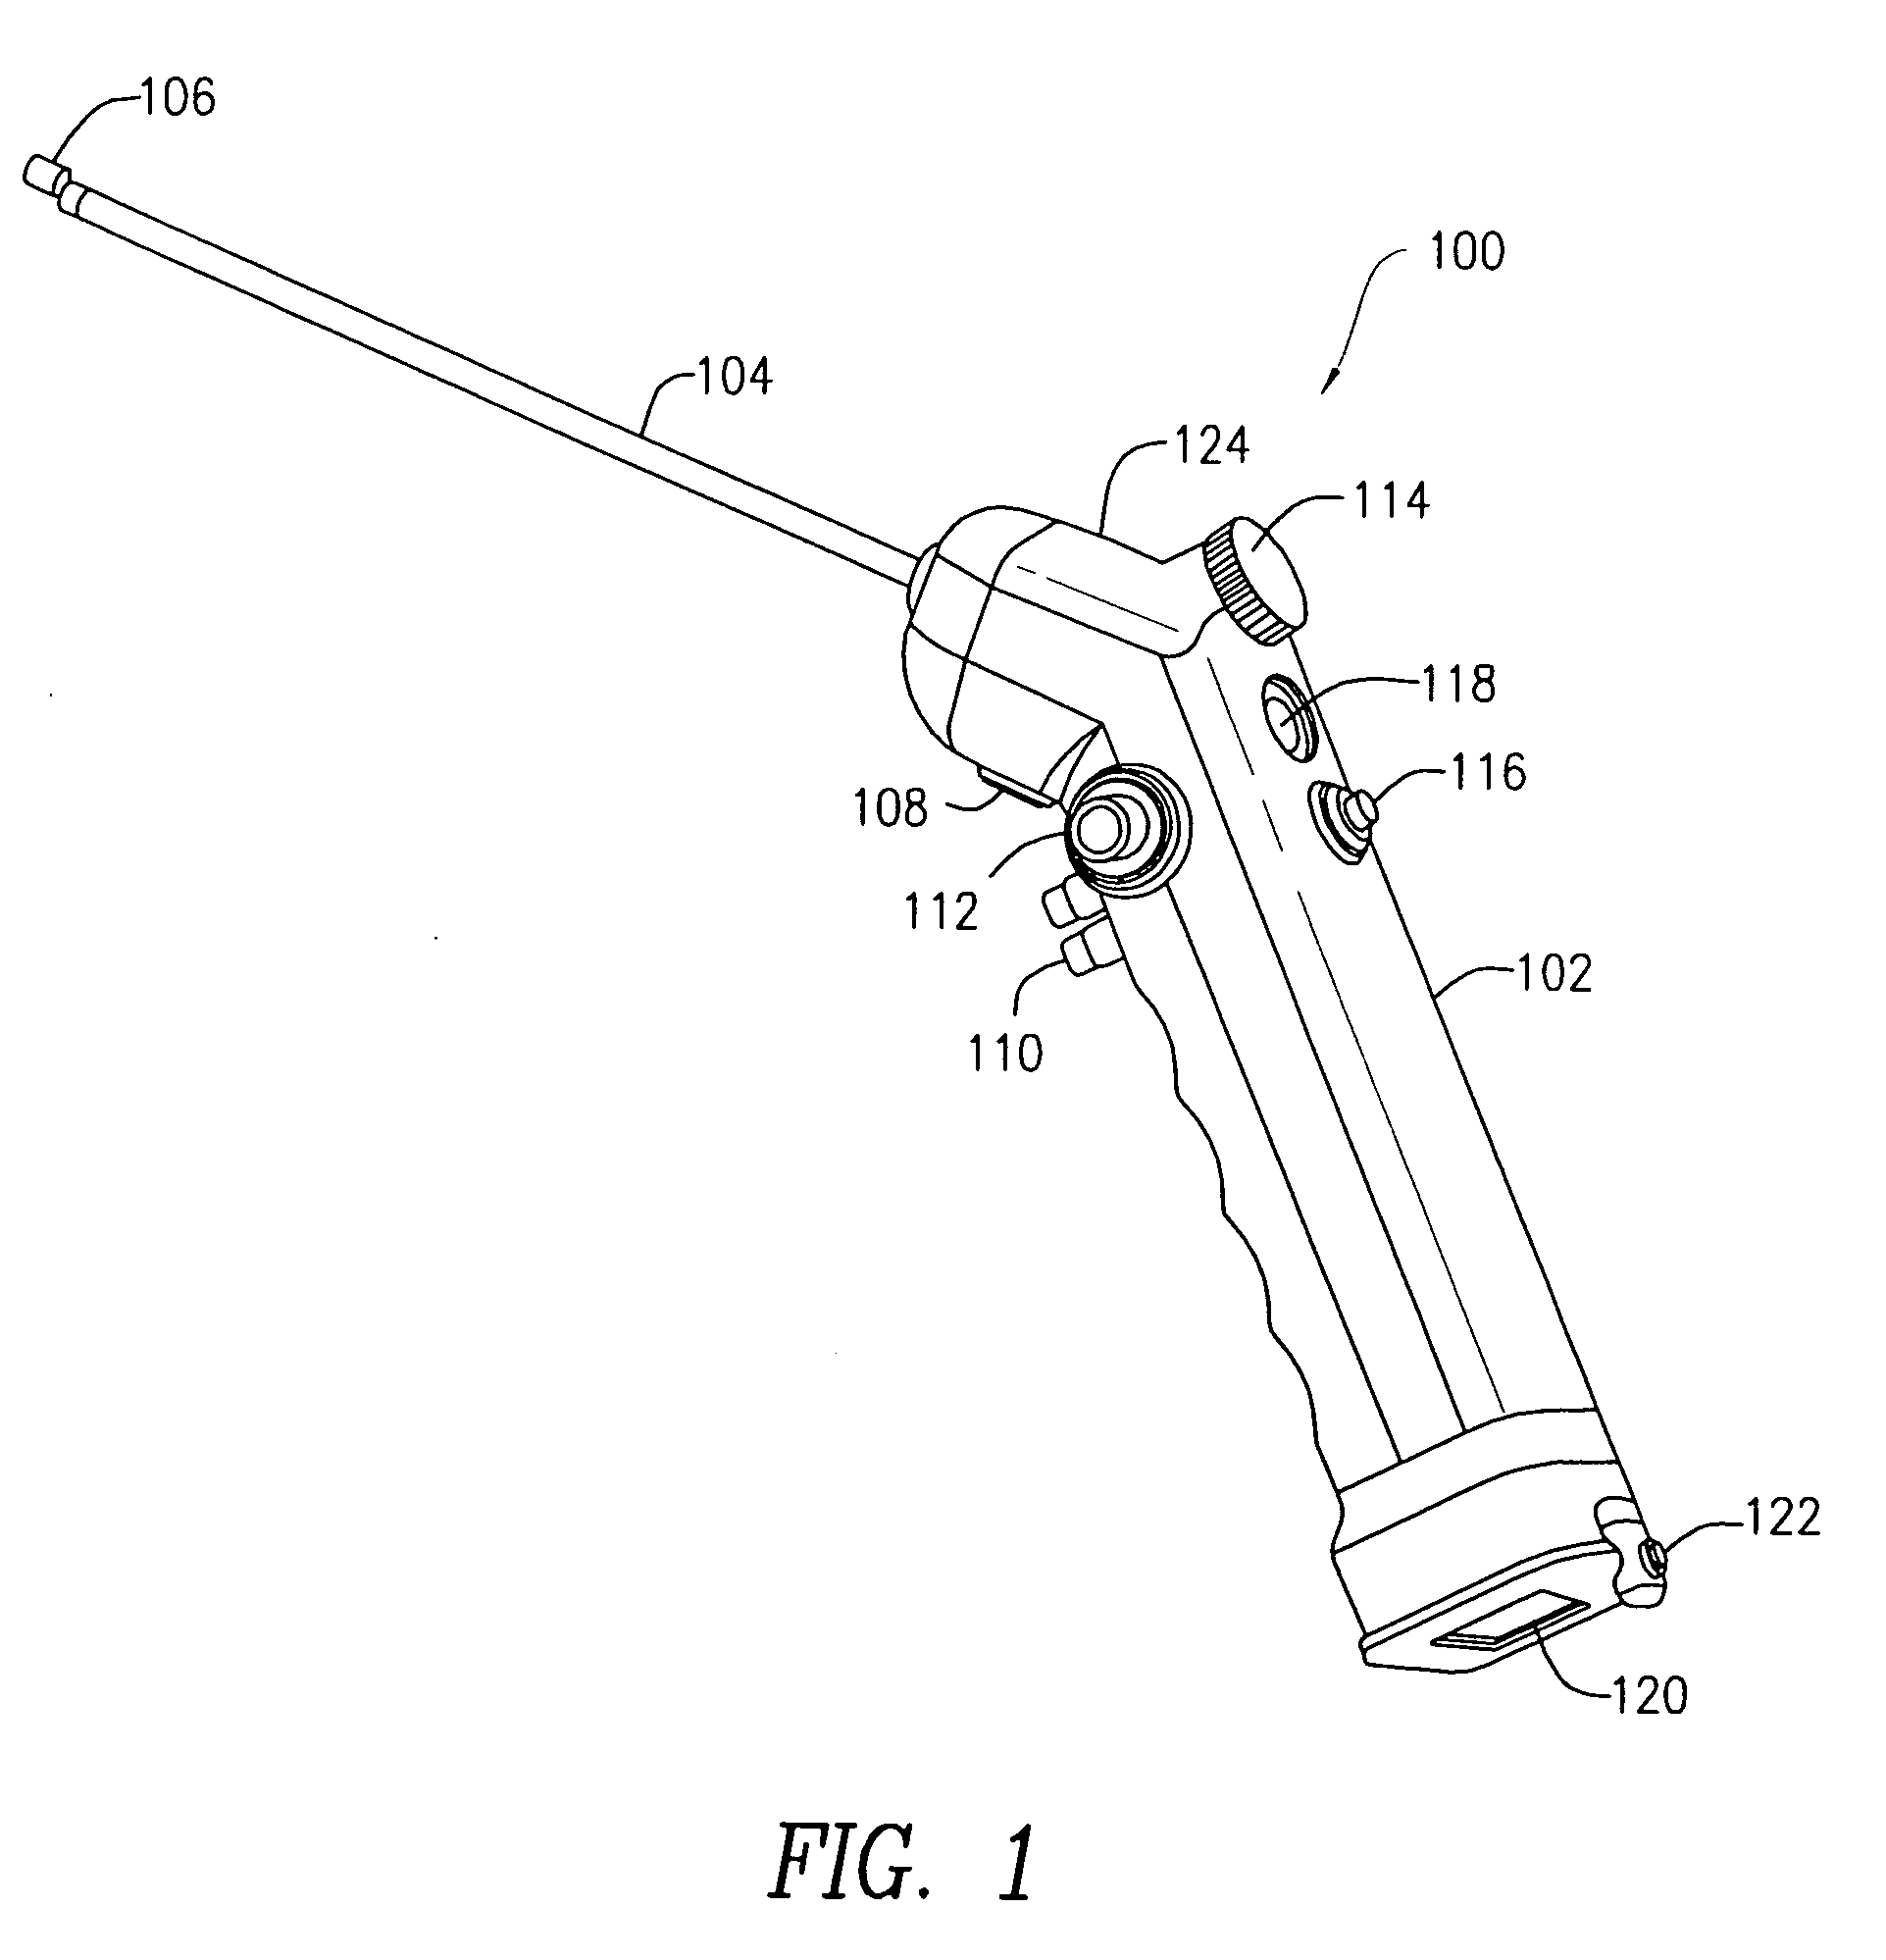 Optical surgical device and method of use